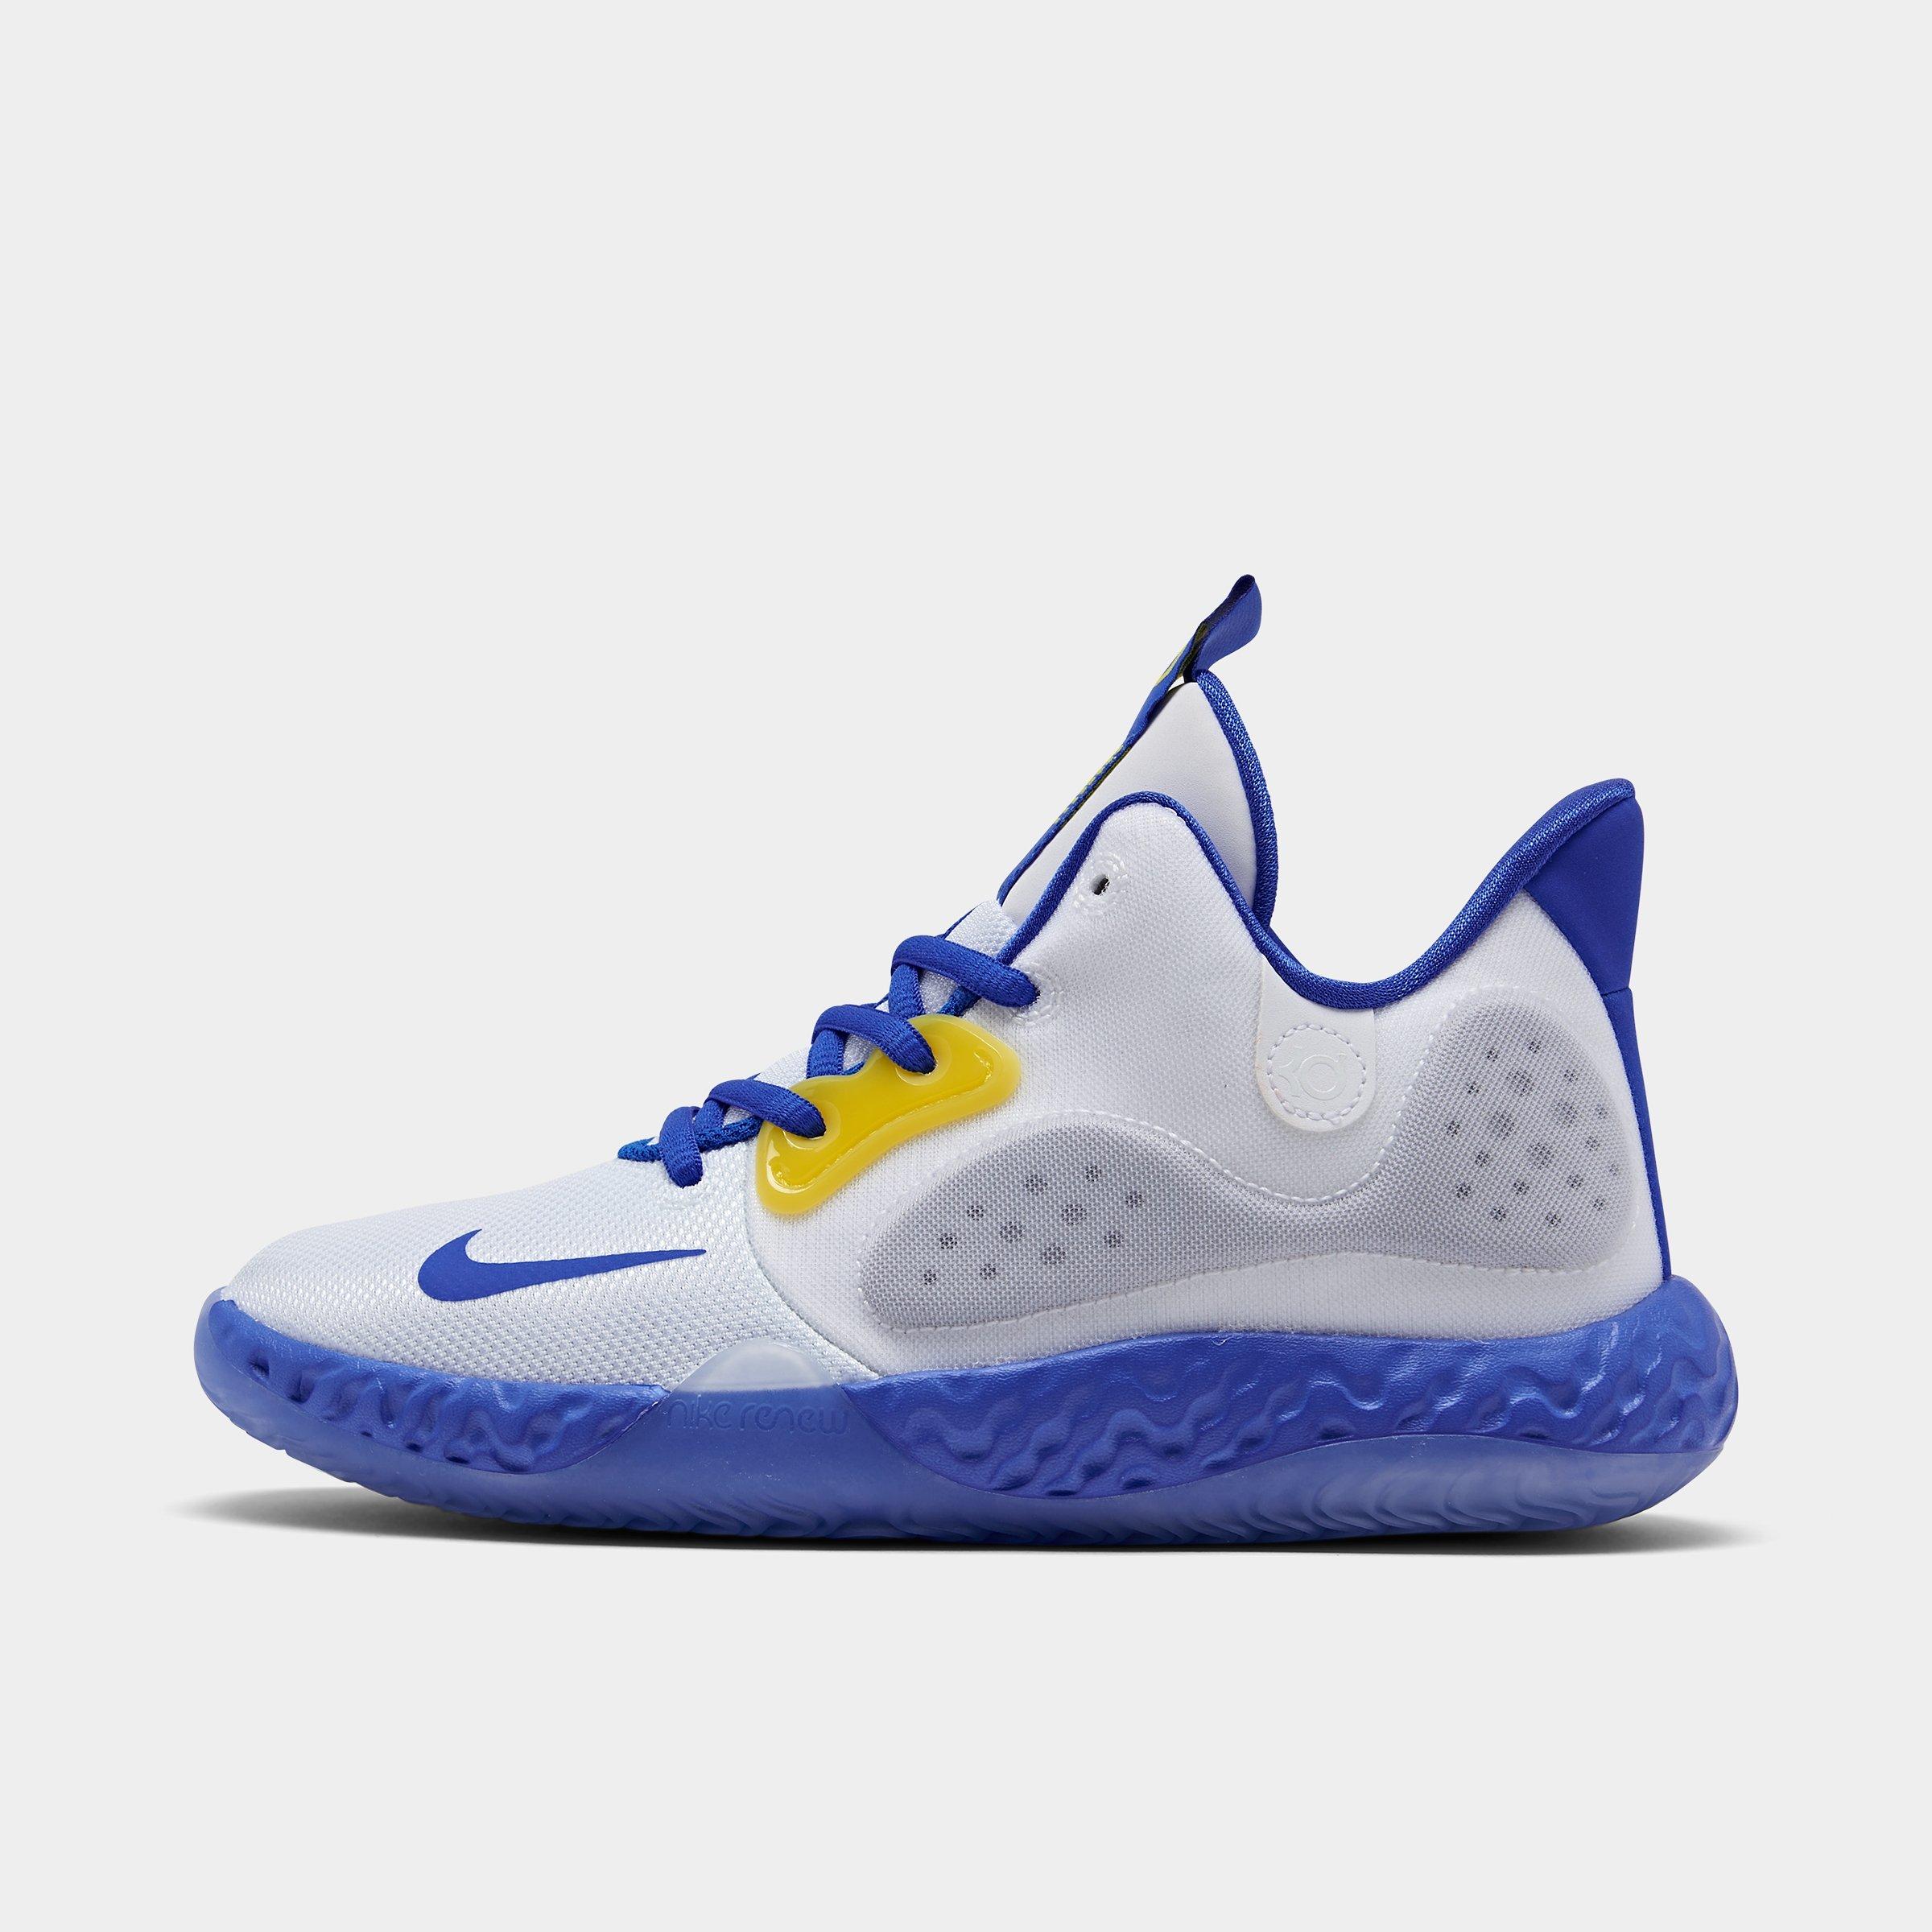 kevin durant shoes finish line